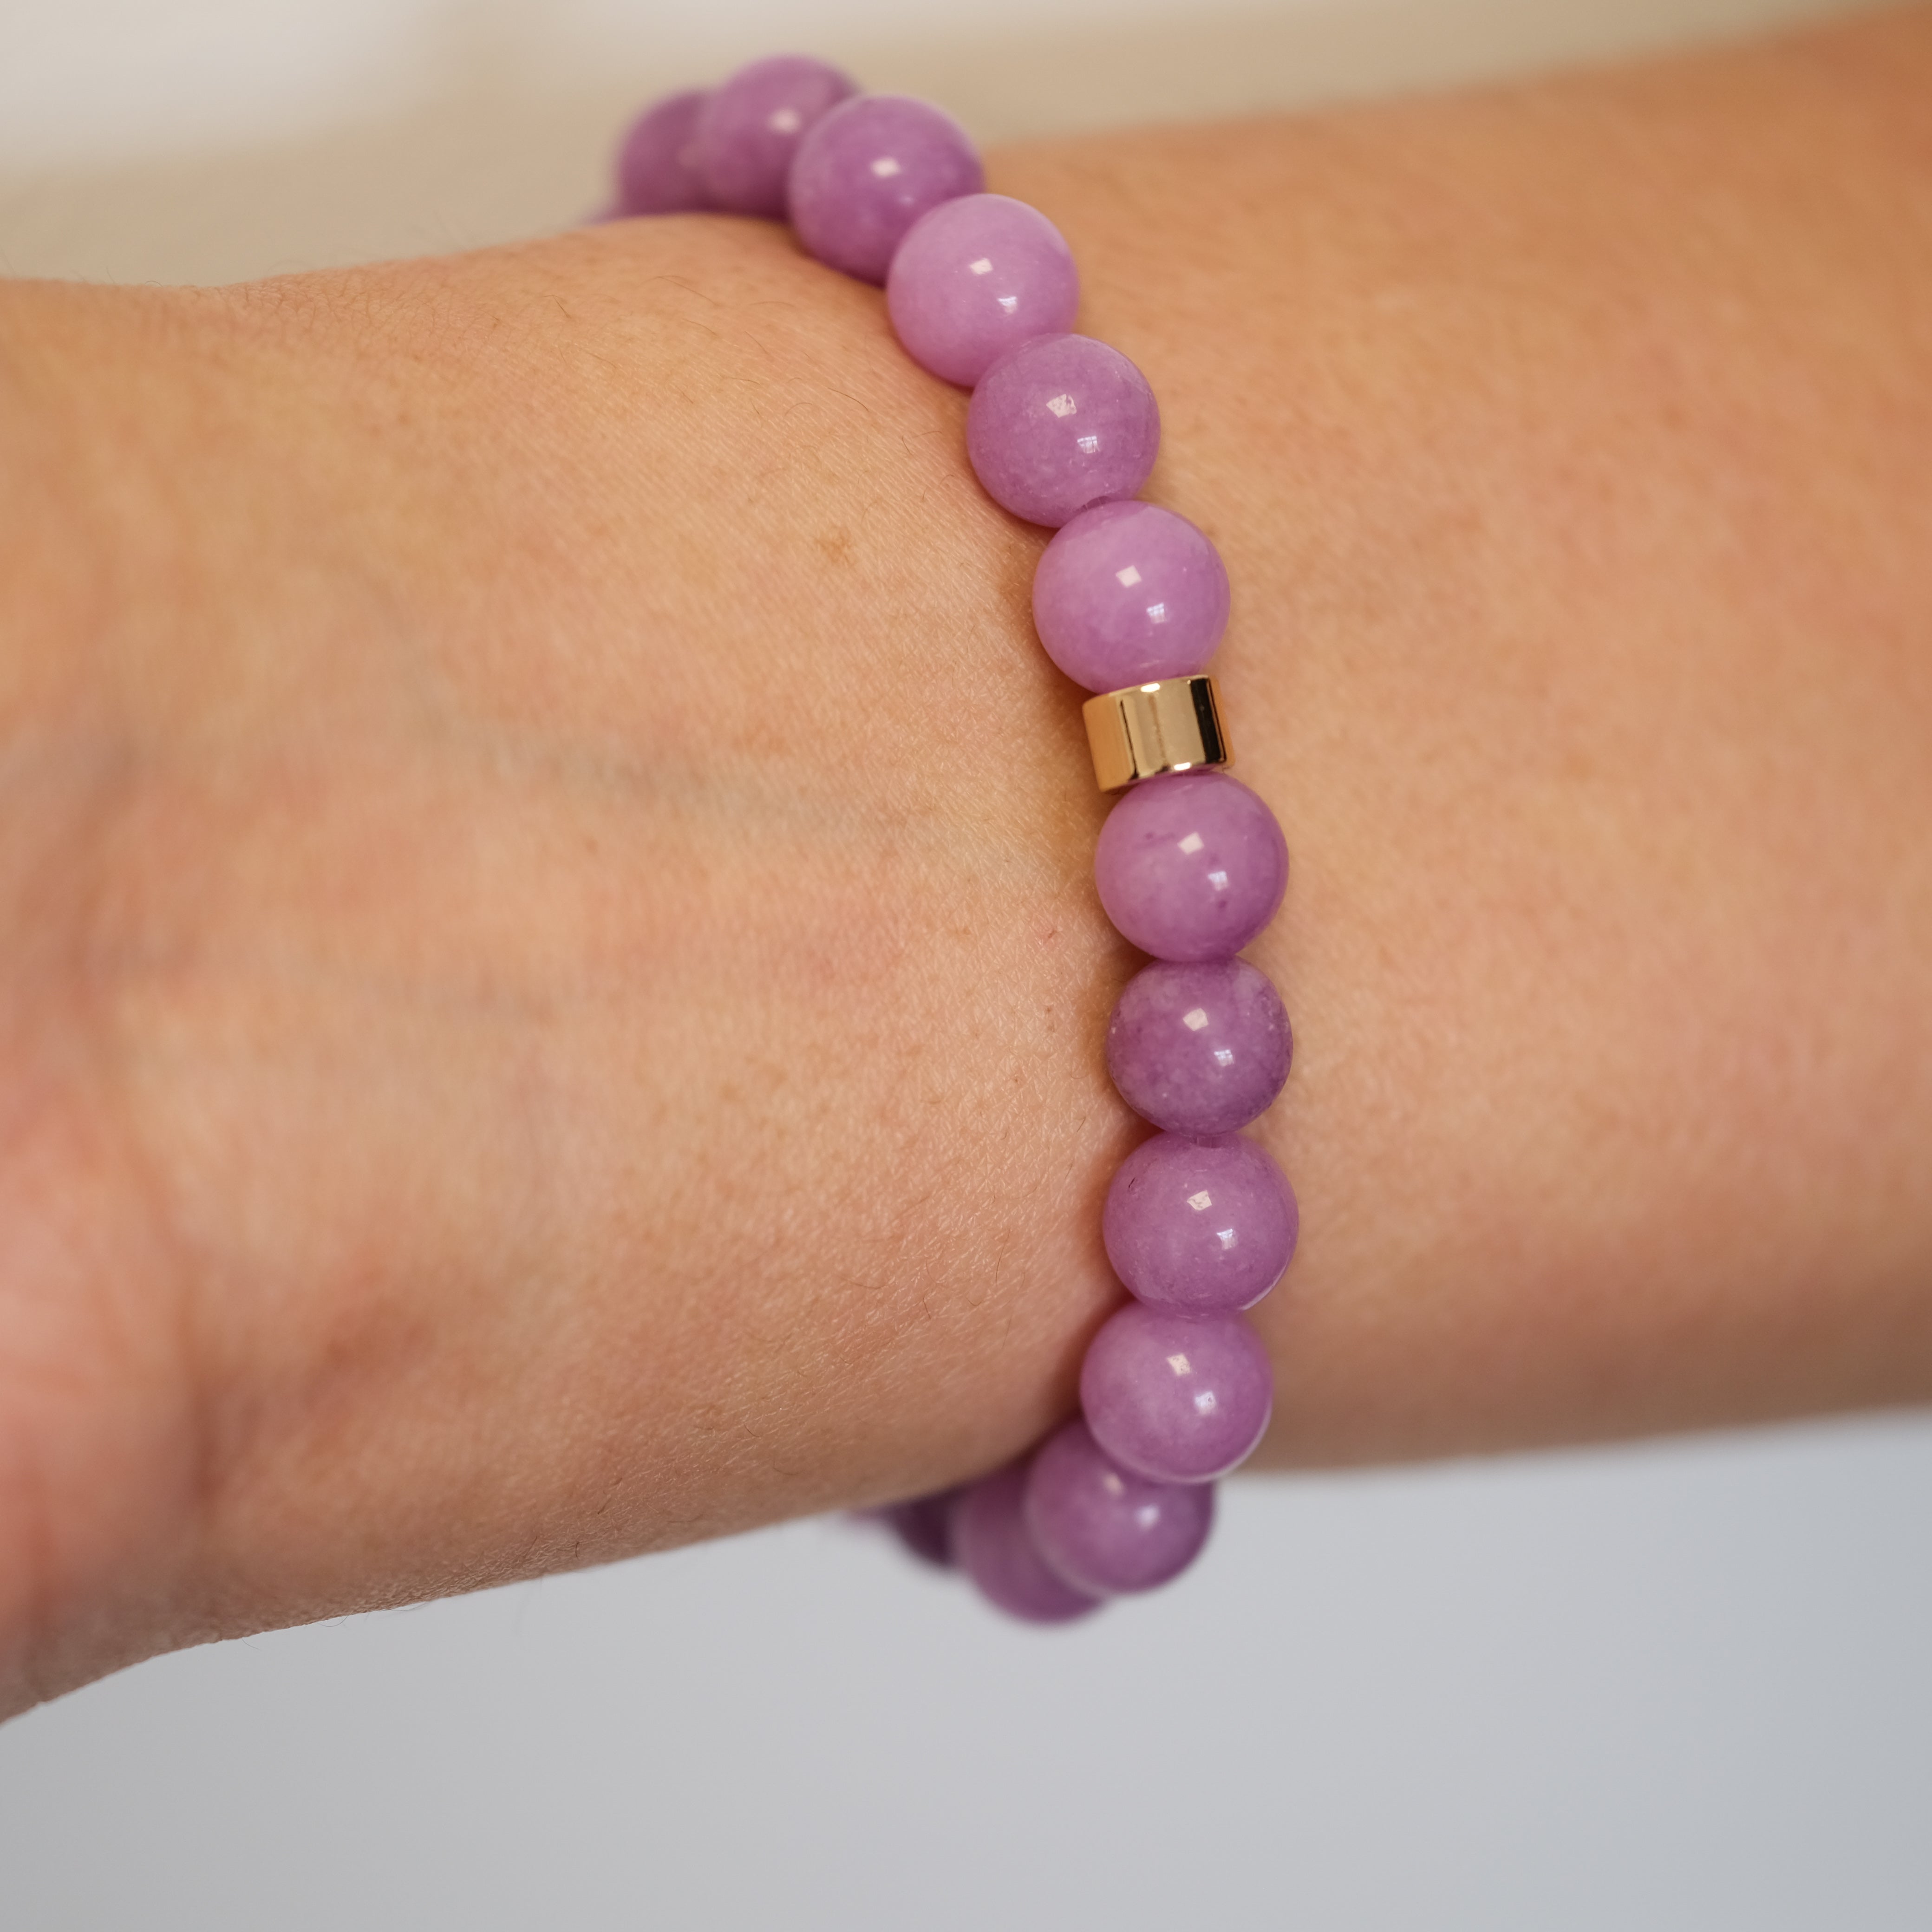 Lepidolite gemstone bracelet with gold accessories on a model's wrist from the back